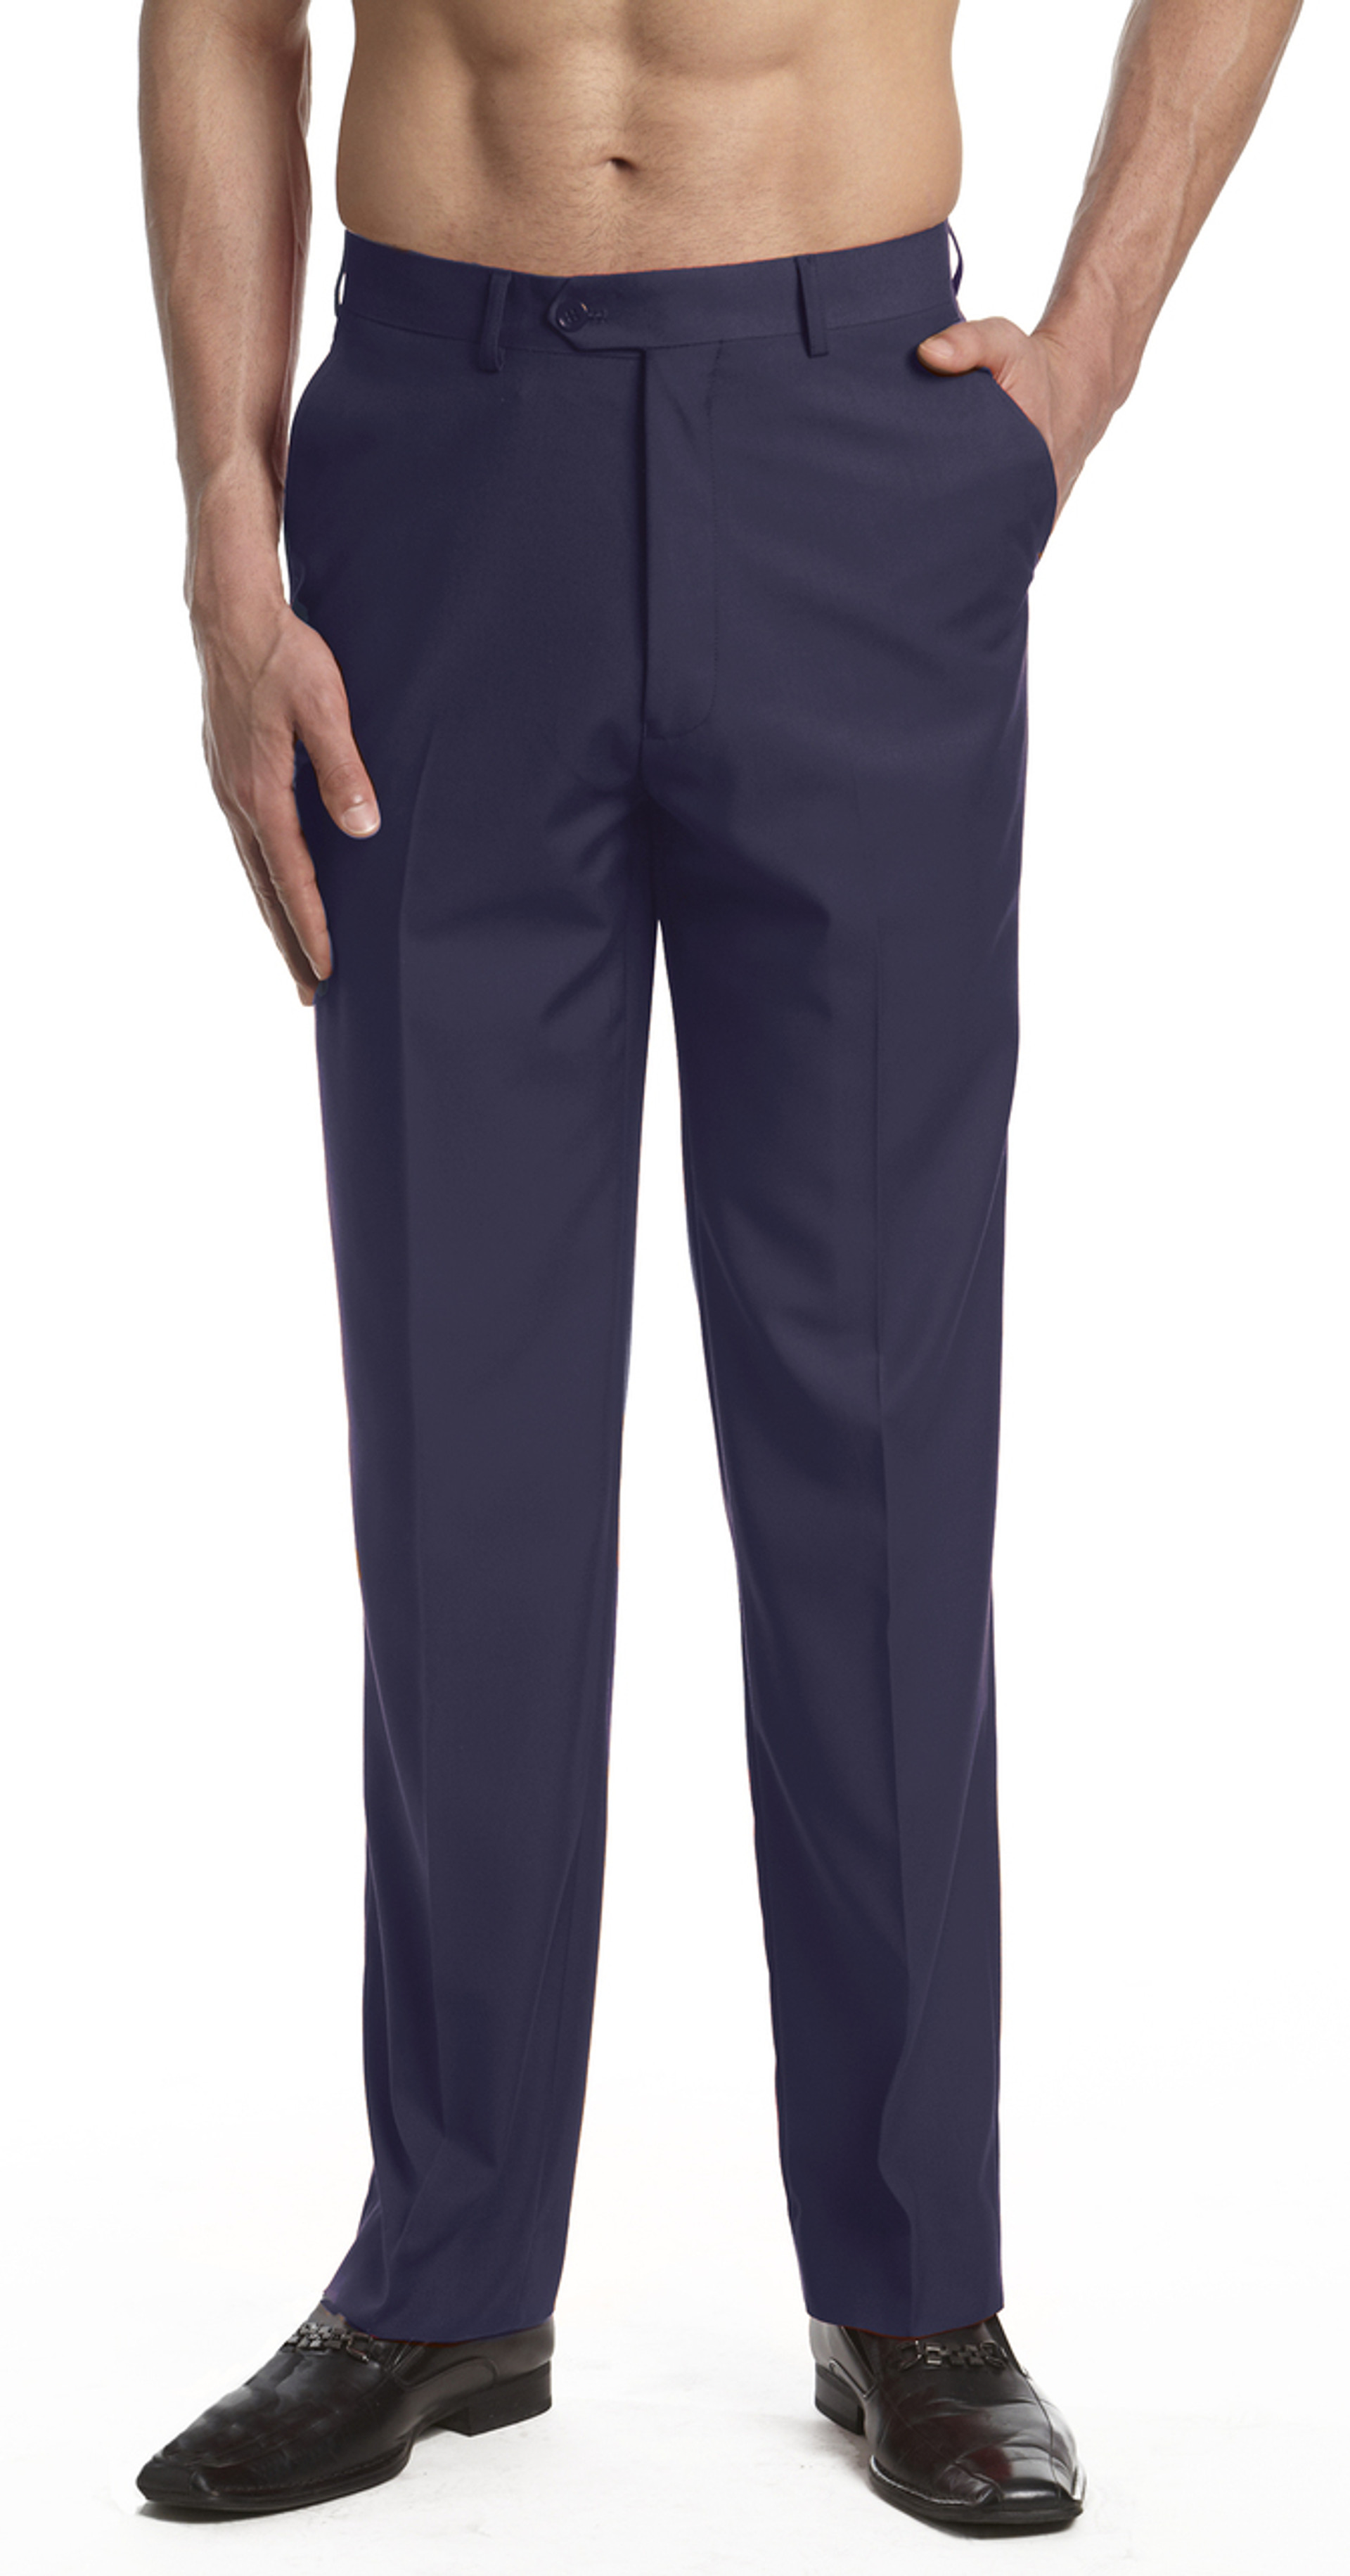 Men's Chocolate Brown Color Dress Pants by Concitor